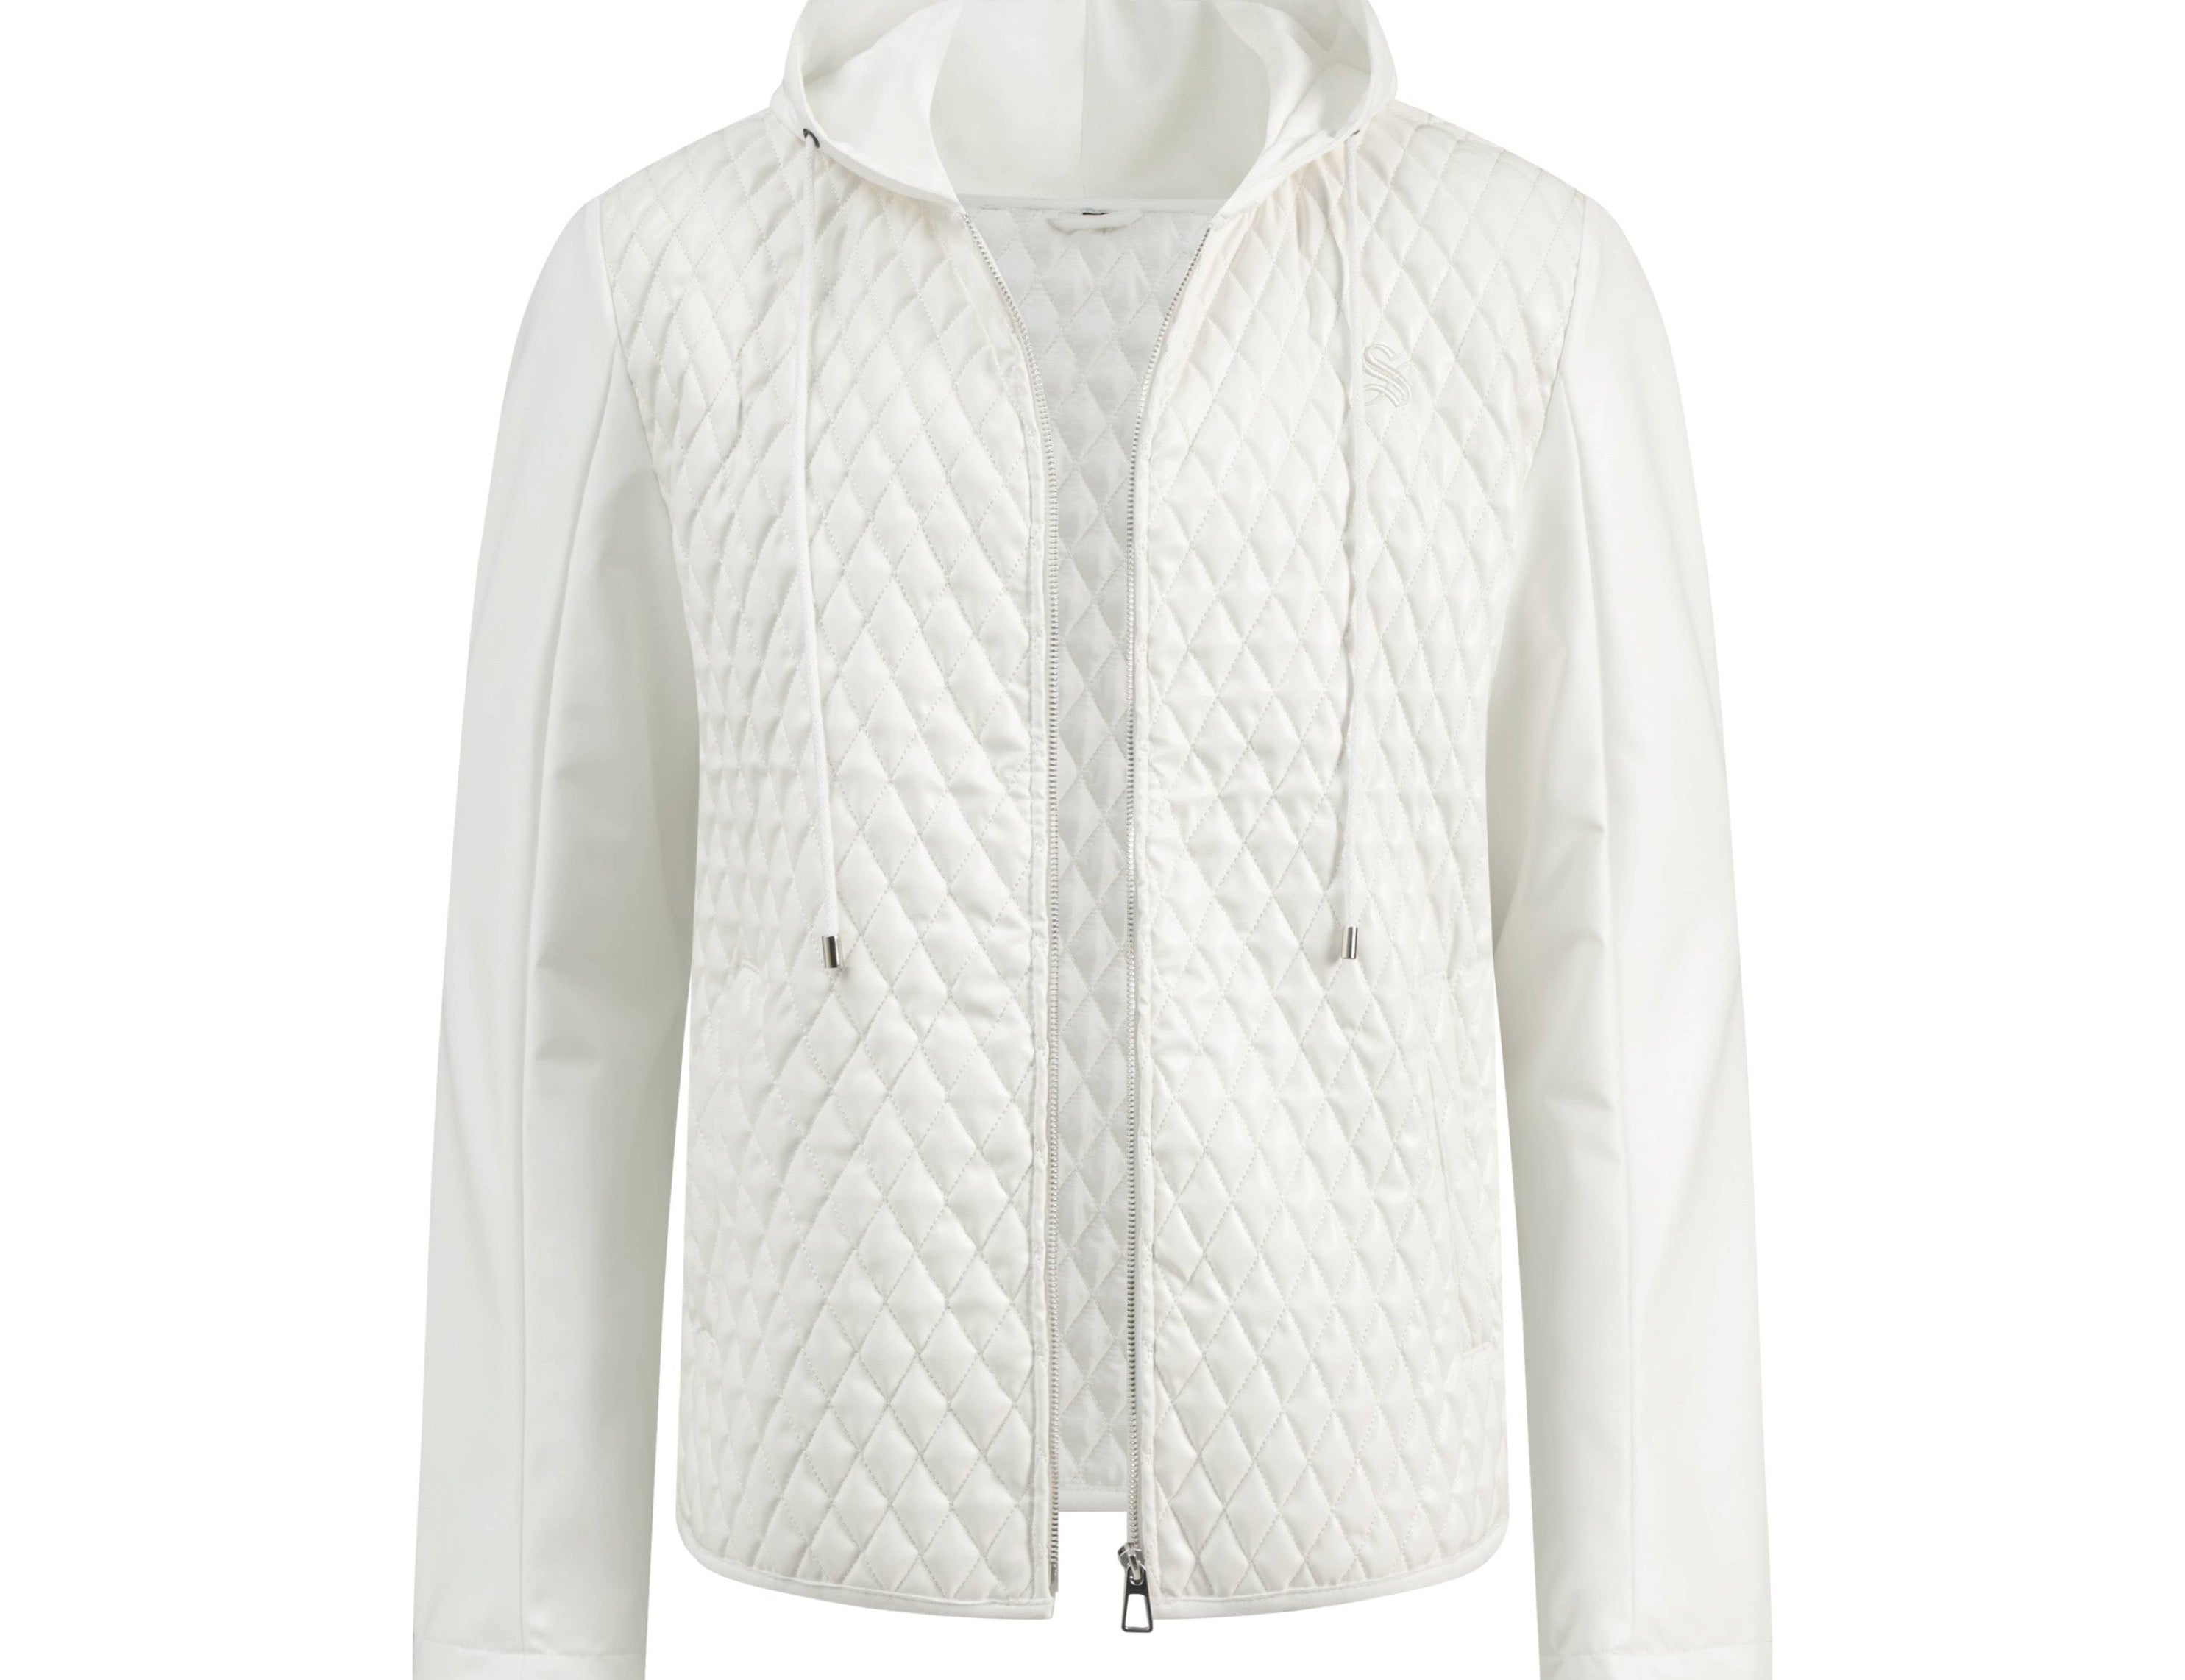 Robin 6 - White Jacket for Men (PRE-ORDER DISPATCH DATE 15 AUGUST 2023) - Sarman Fashion - Wholesale Clothing Fashion Brand for Men from Canada